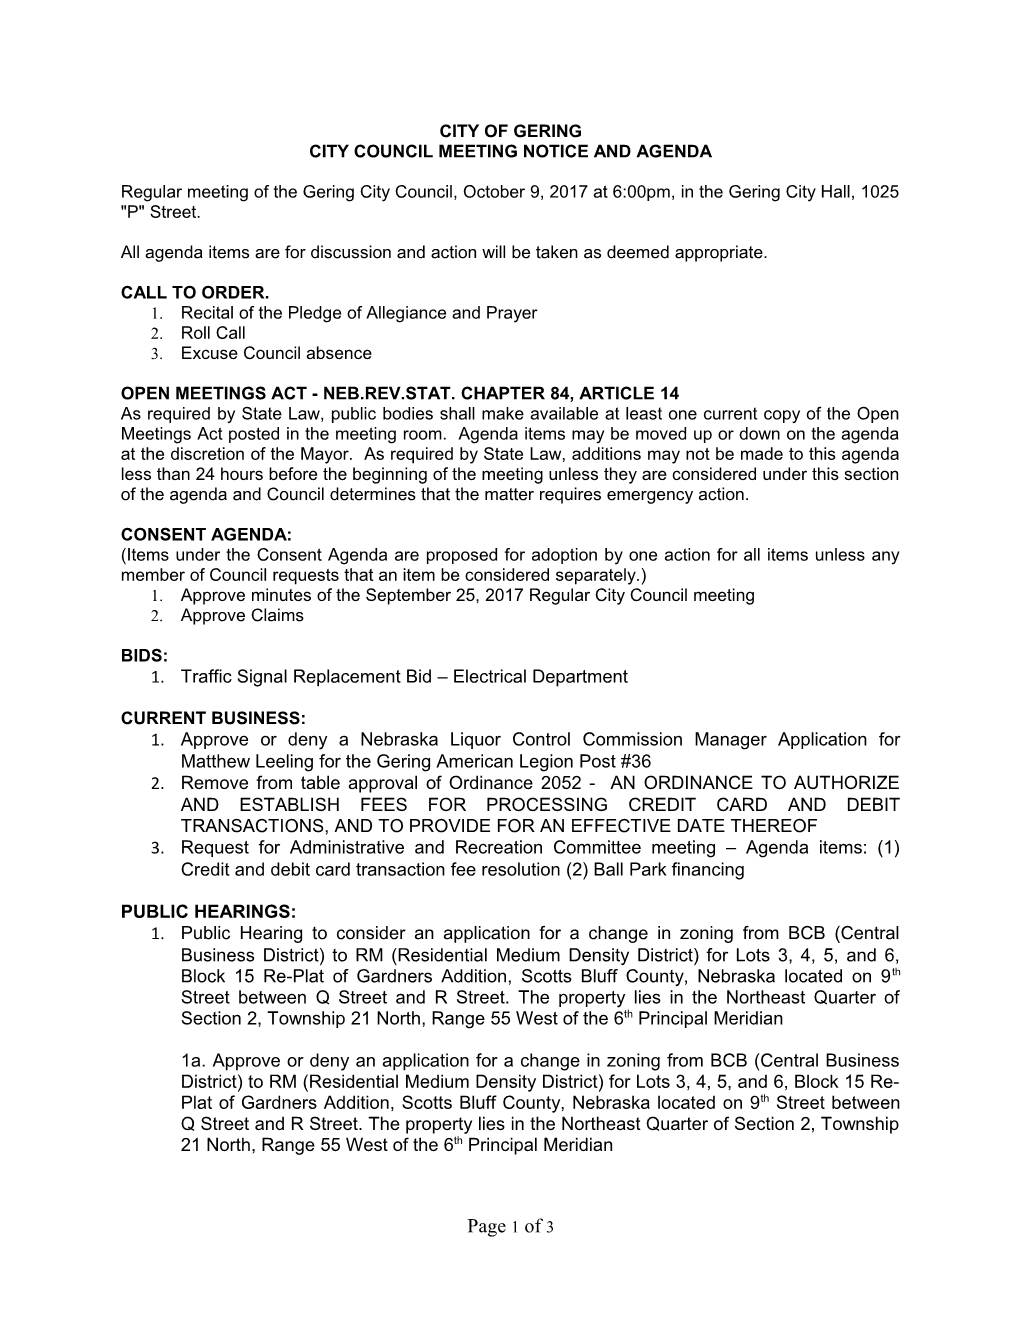 City Council Meeting Notice and Agenda